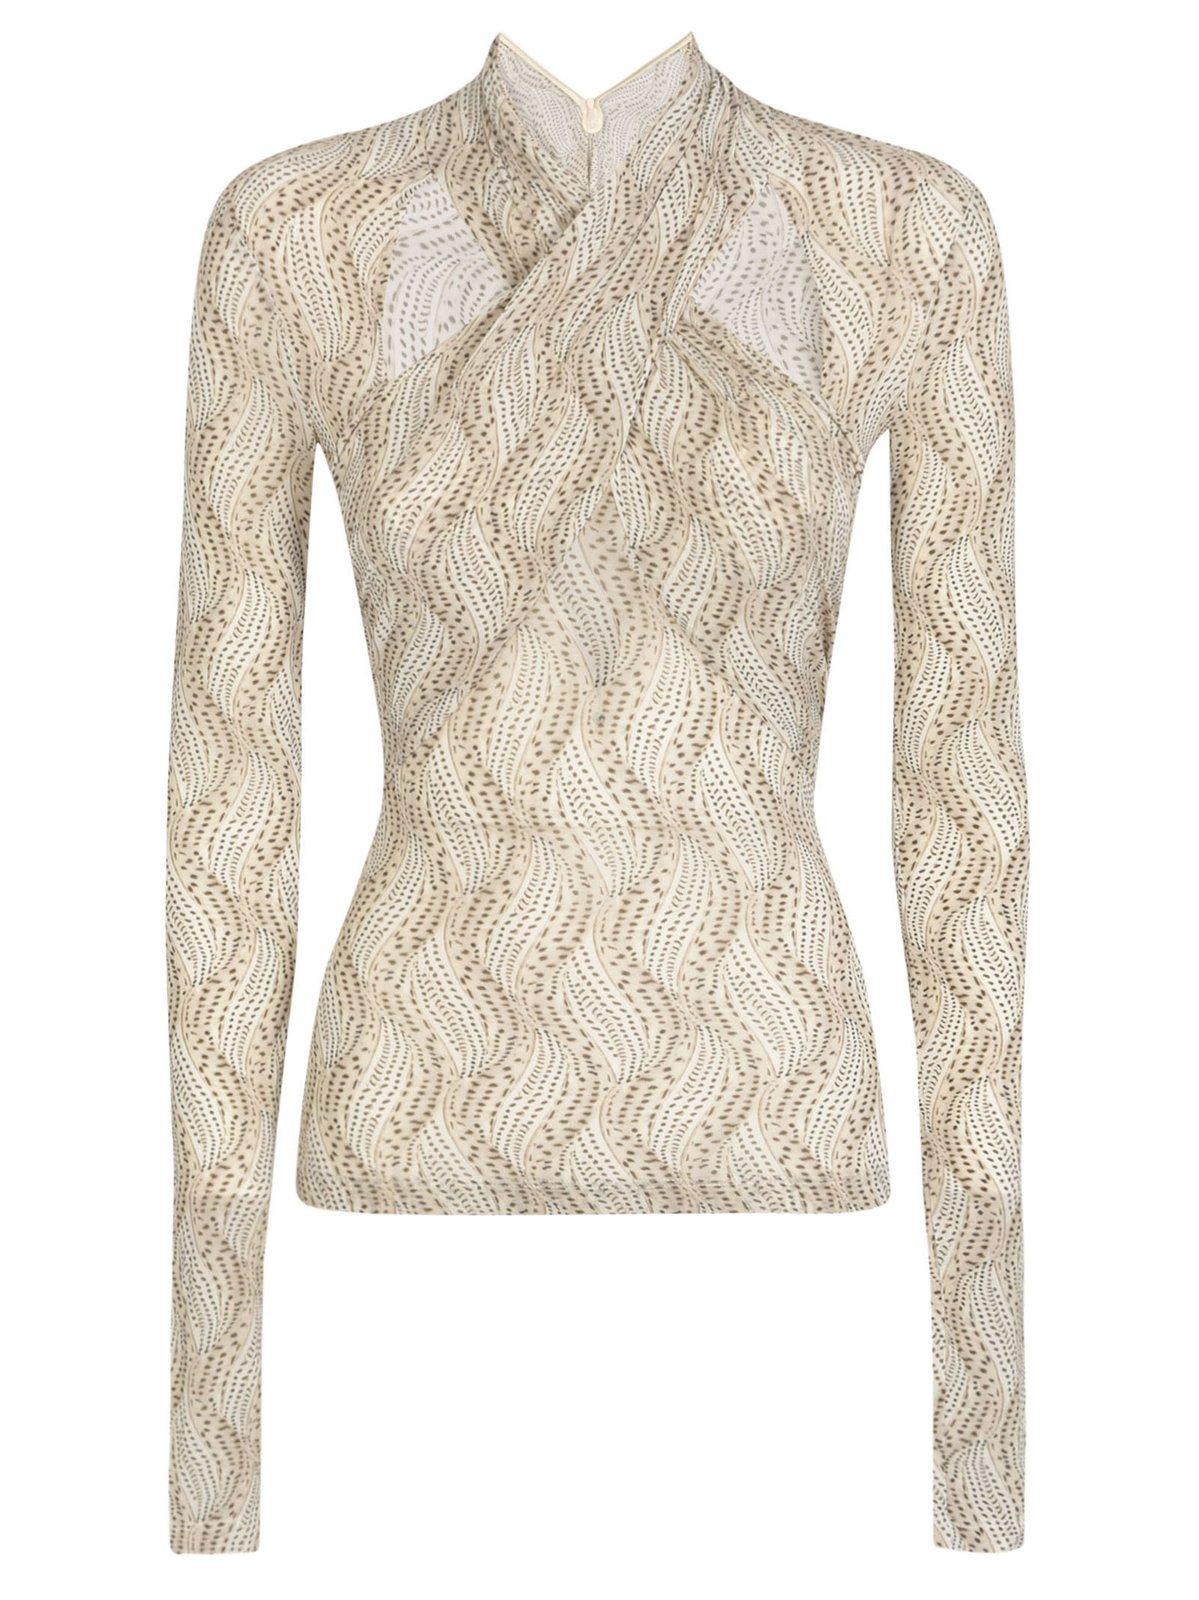 ISABEL MARANT CUT-OUT DETAILED CROSSOVER NECK TOP